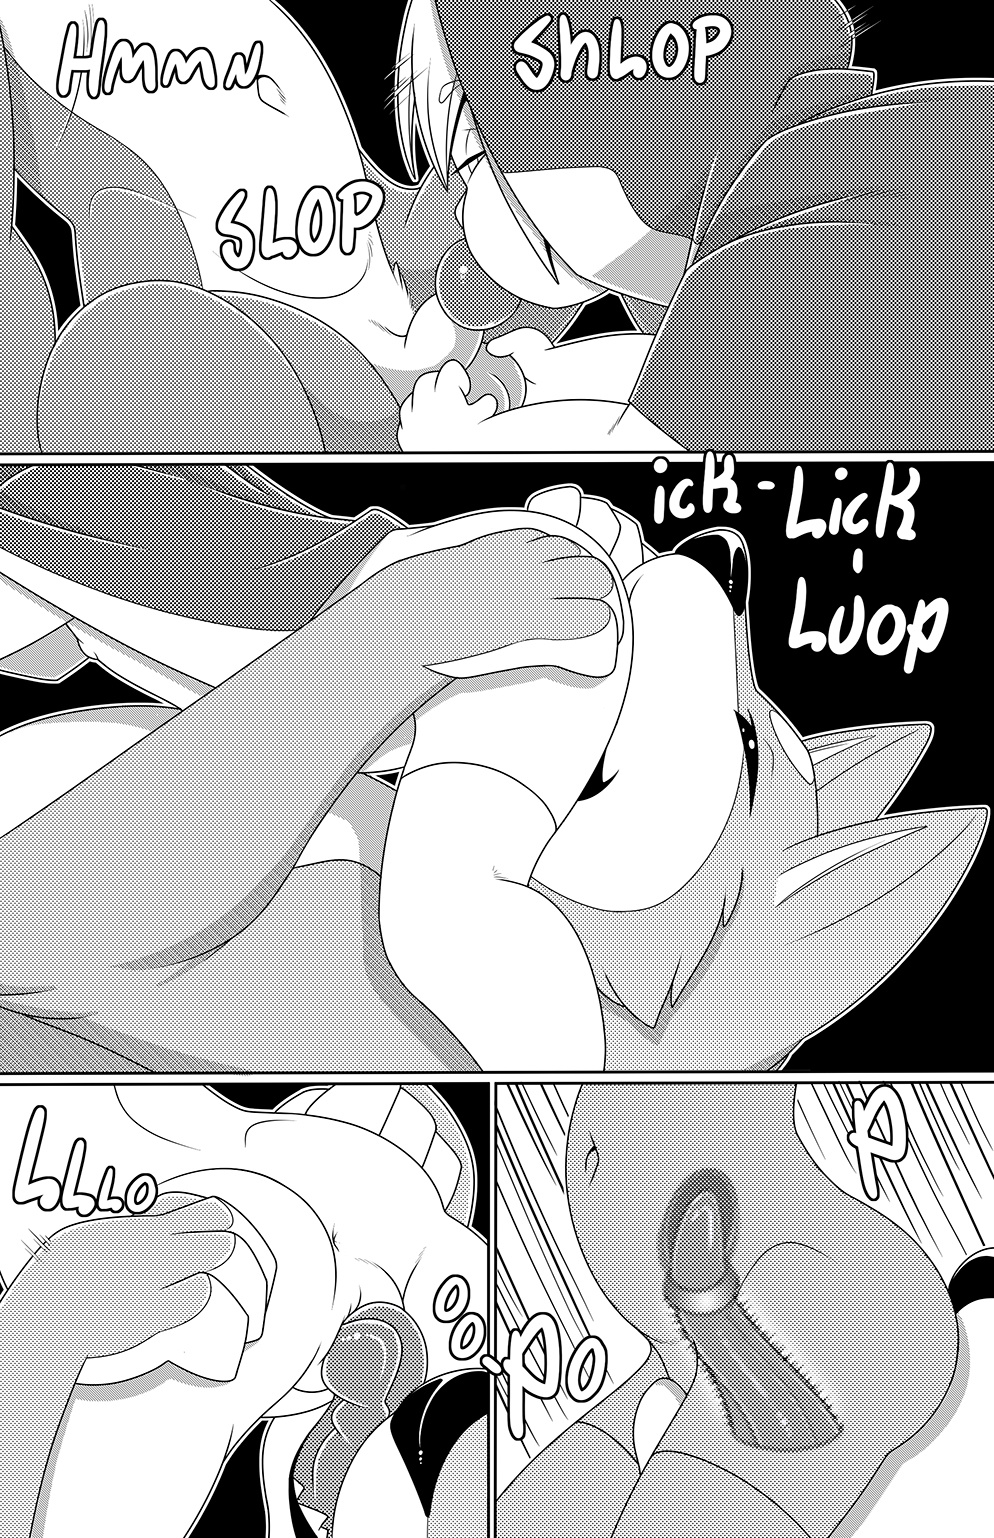 Knotty Pup porn comics Oral sex, Anal Sex, Bestiality, Blowjob, Cum Swallow, Double Penetration, Furry, Group Sex, Lolicon, Stockings, Straight, X-Ray